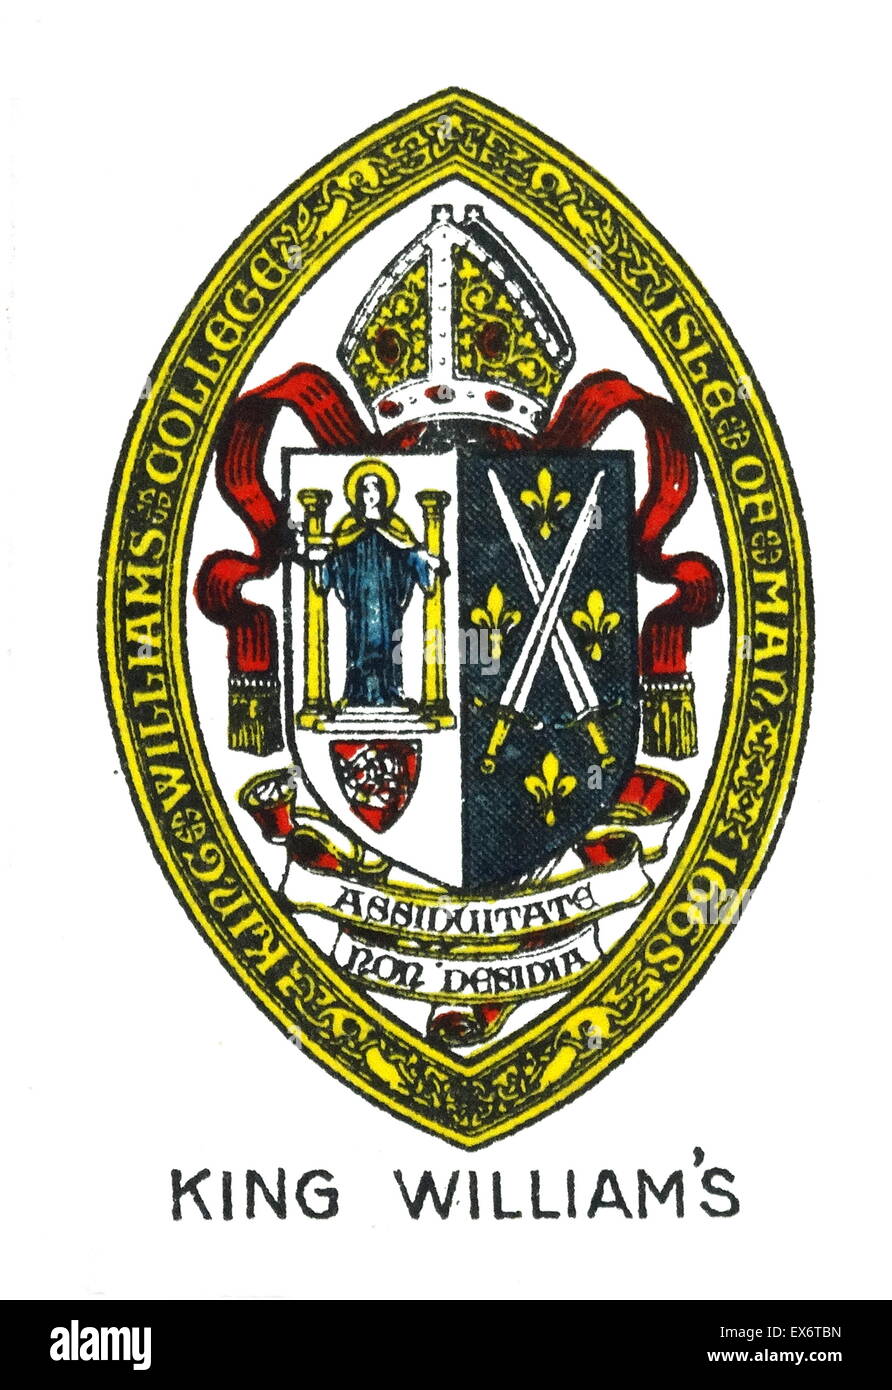 Emblem for King William's College near Castletown, Isle of Man, an international Baccalaureate HMC independent school. It was founded by Isaac Barrow in 1833. Stock Photo